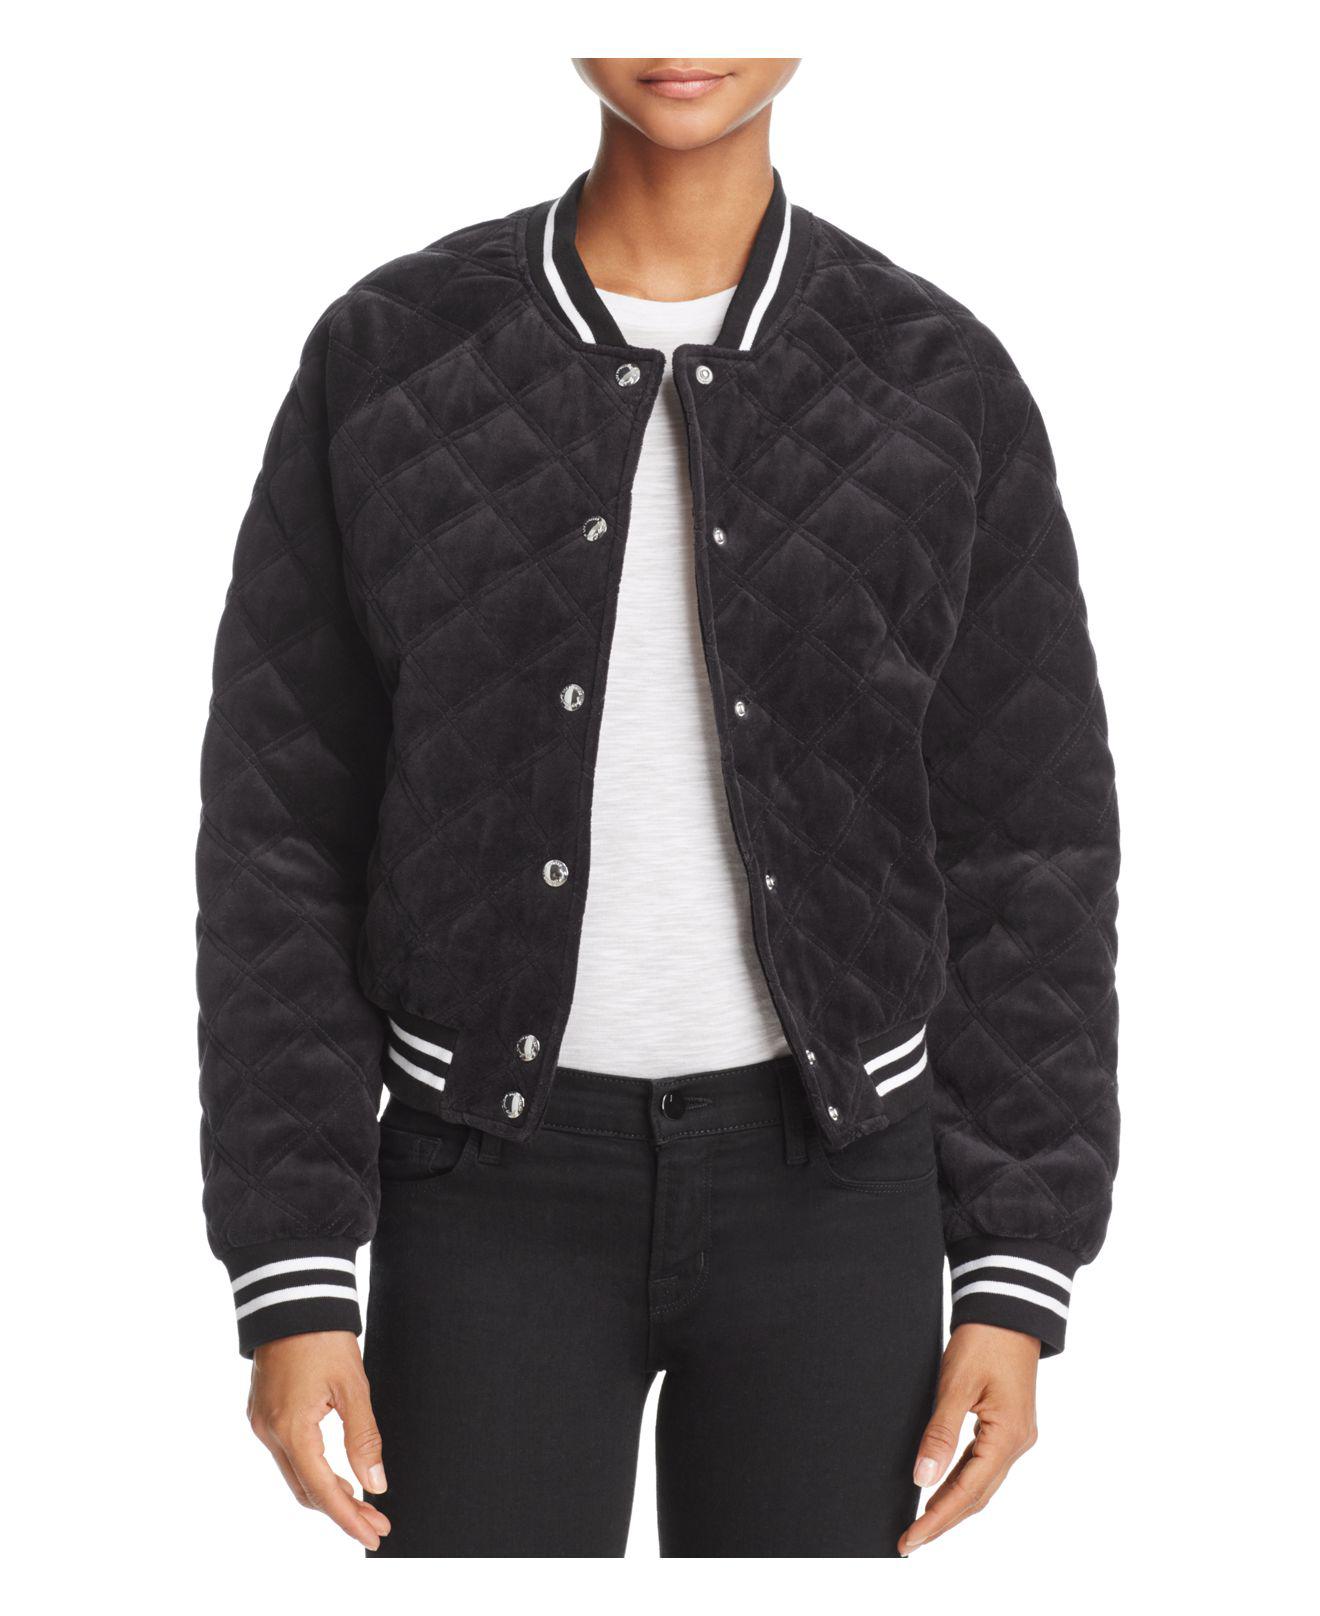 Juicy Couture Quilted Velour Bomber Jacket in Black - Lyst